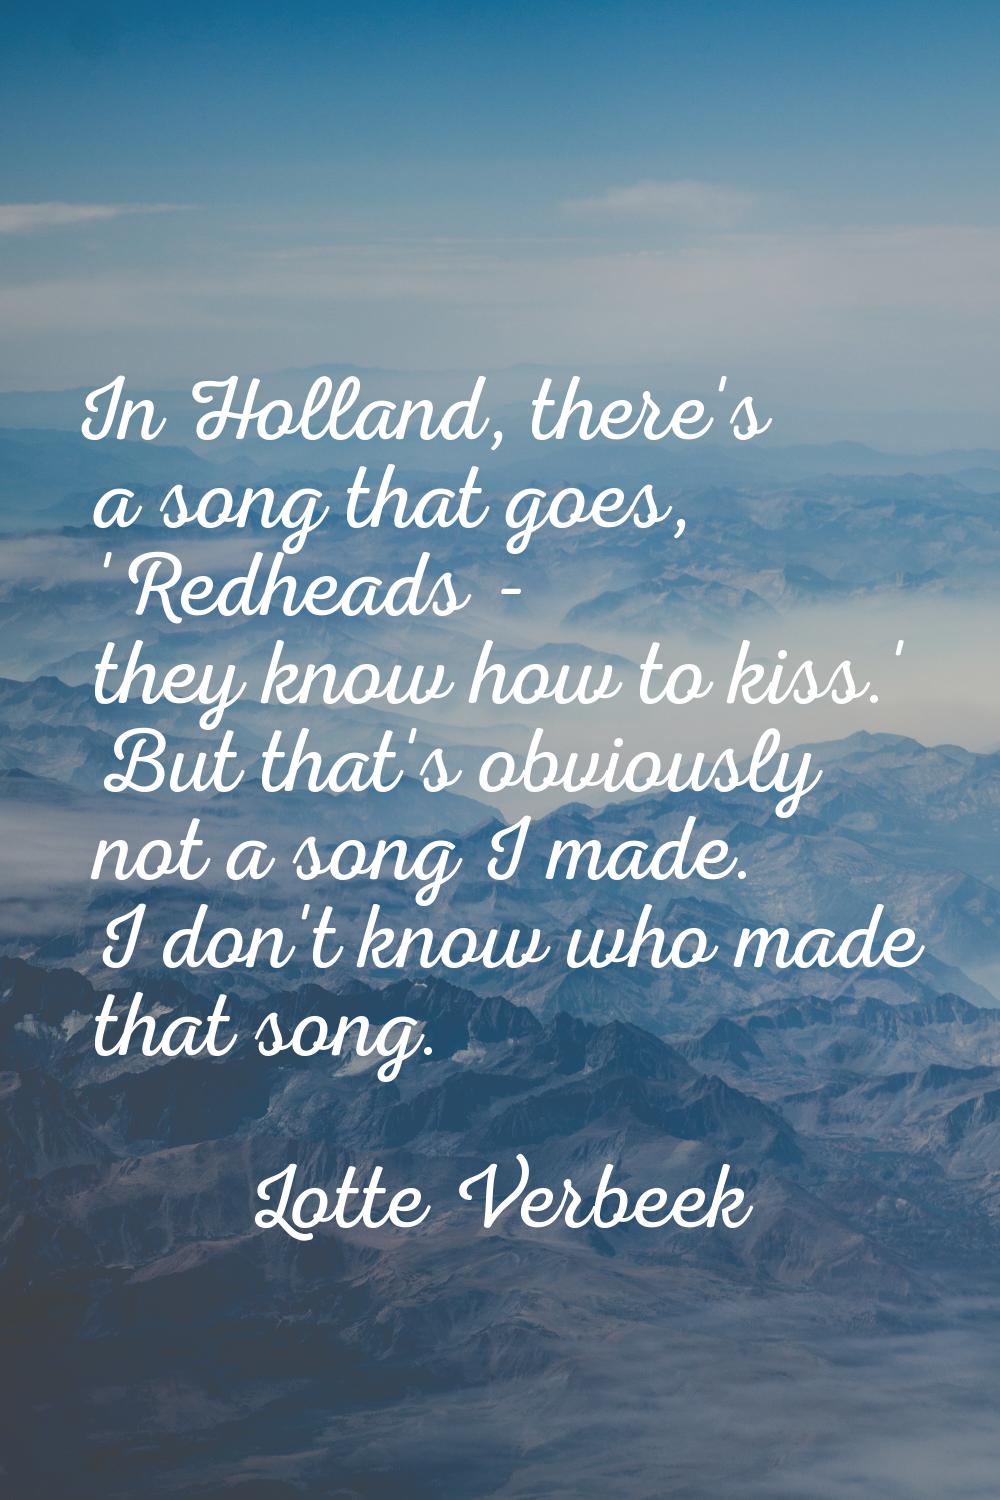 In Holland, there's a song that goes, 'Redheads - they know how to kiss.' But that's obviously not 